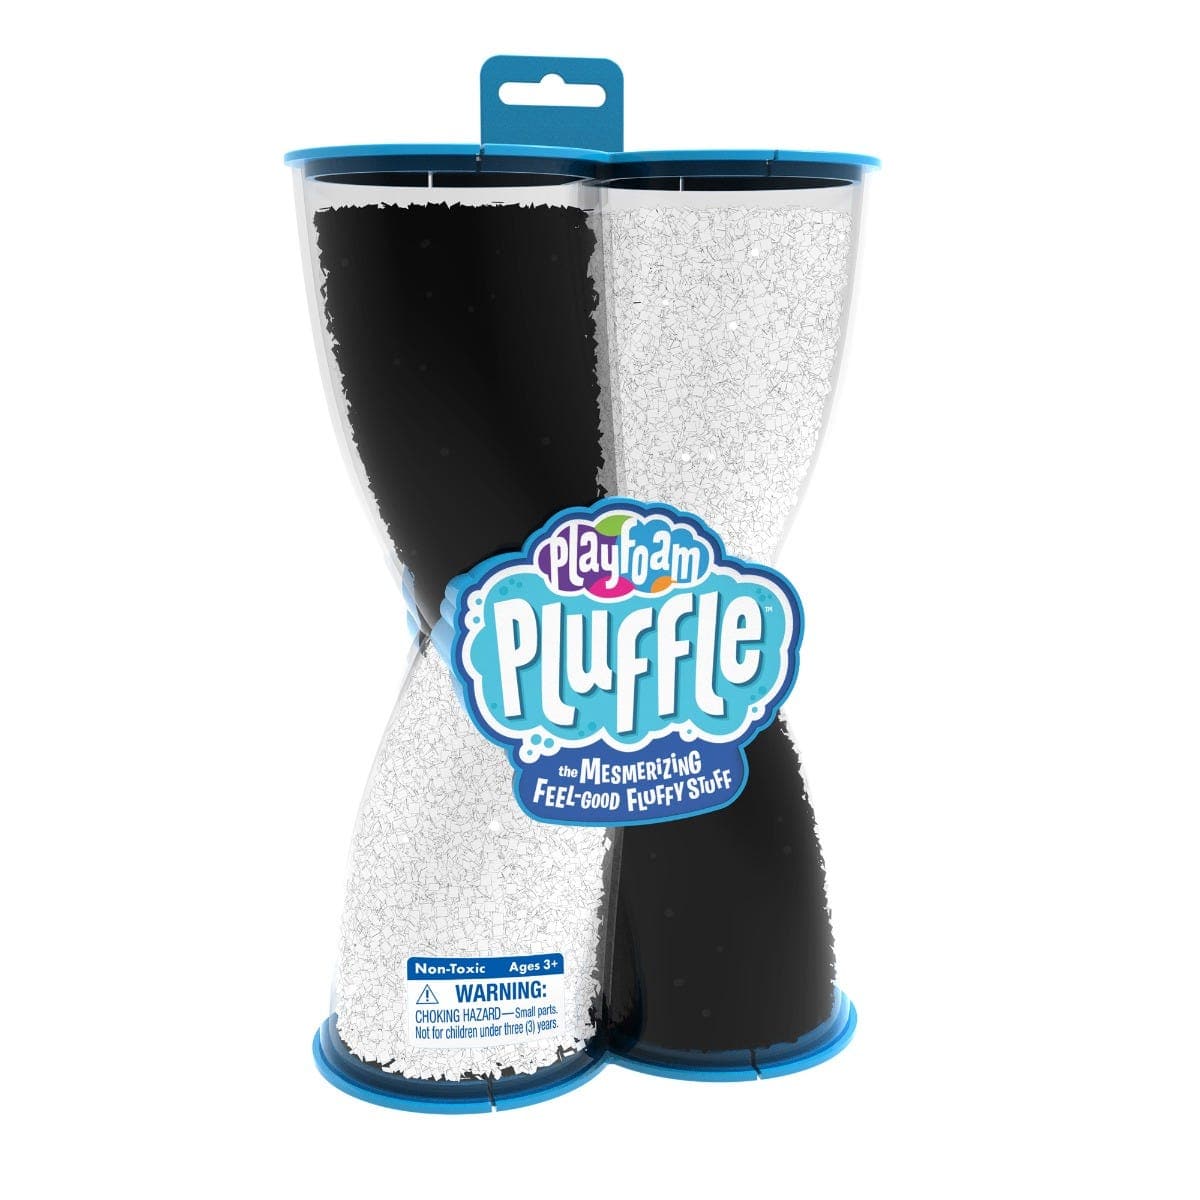 Playfoam Pluffle Twist Black & White, Playfoam Pluffle™ Twist Black & White is the mesmerising feelgood fluffy stuff that’s perfect for tactile learning and creative play. Flip the new sturdy, twisted resealable packaging design, and pour out eye-catching Playfoam Pluffle. Then grab it with both hands, give it a squish, watch the satisfying, mesmerising, lava-like flowing action. Ideal for creative and tactile play, Playfoam Pluffle Twist Black & White is the mesmerising, feelgood fluffy stuff Ideal for tac